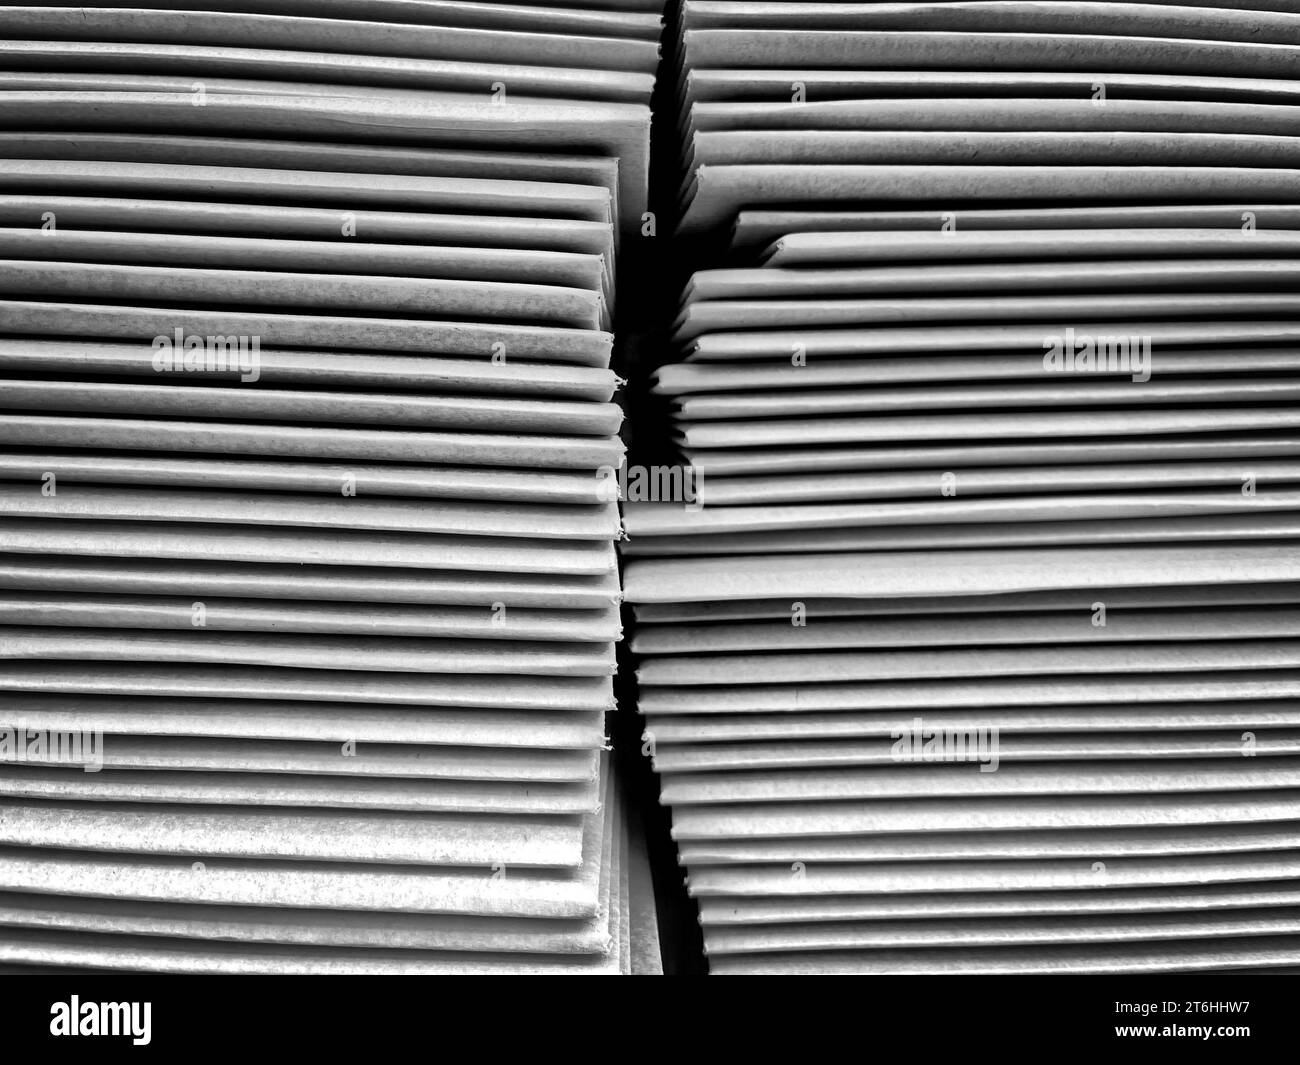 A pile of cardboard boxes are placed side by side in a warehouse setting, illuminated by a dim light source Stock Photo